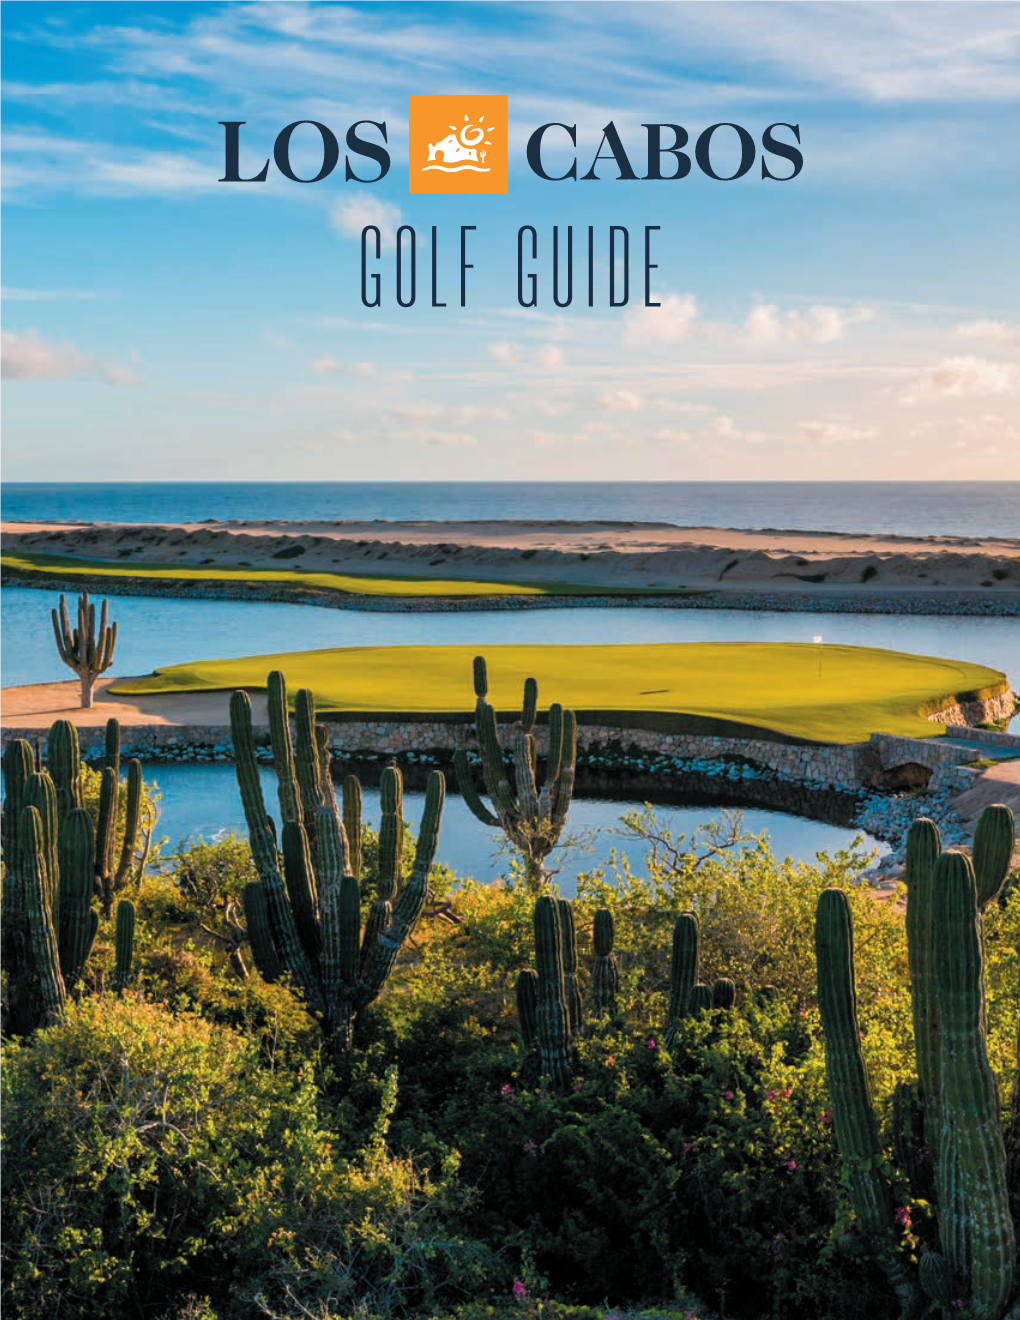 Where to Stay in Los Cabos